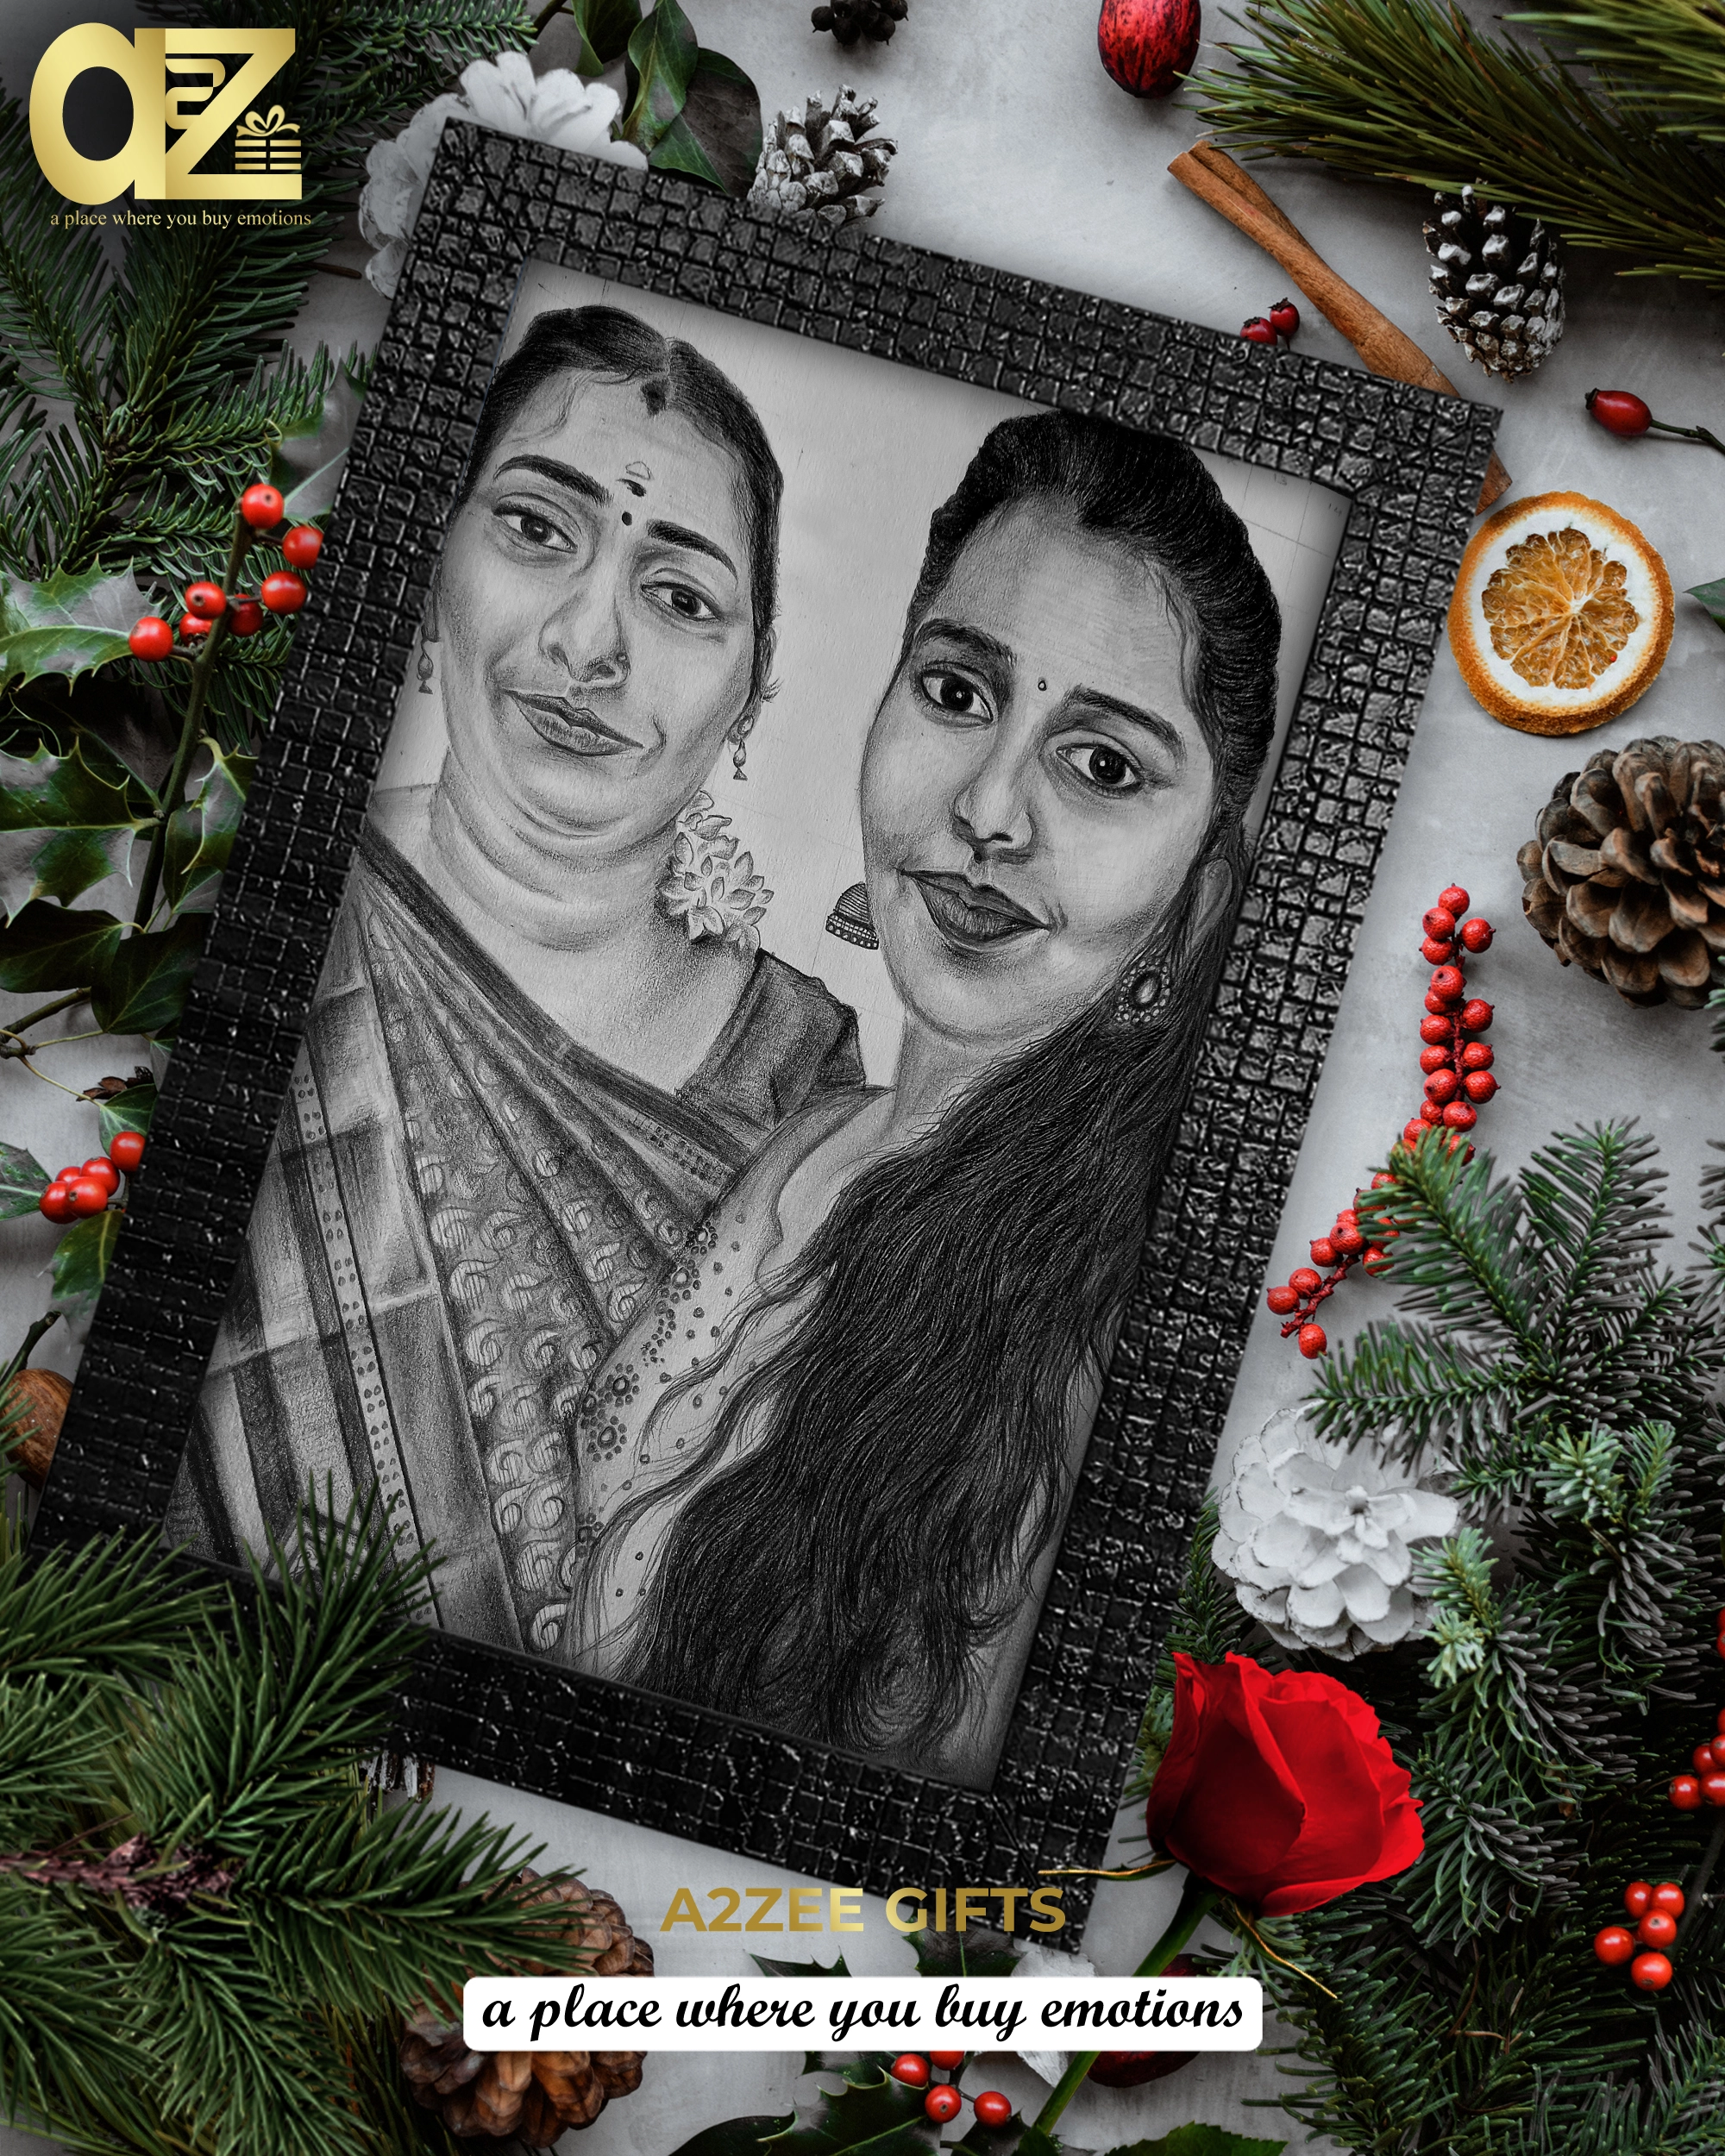 Photo to Pencil Sketch Starts Rs.999 Only in Indore |Valentine's Day  affordable unique gift – ✓Gift Pencil Sketch| Custom Portrait Painting |  Sketch Artist in indore